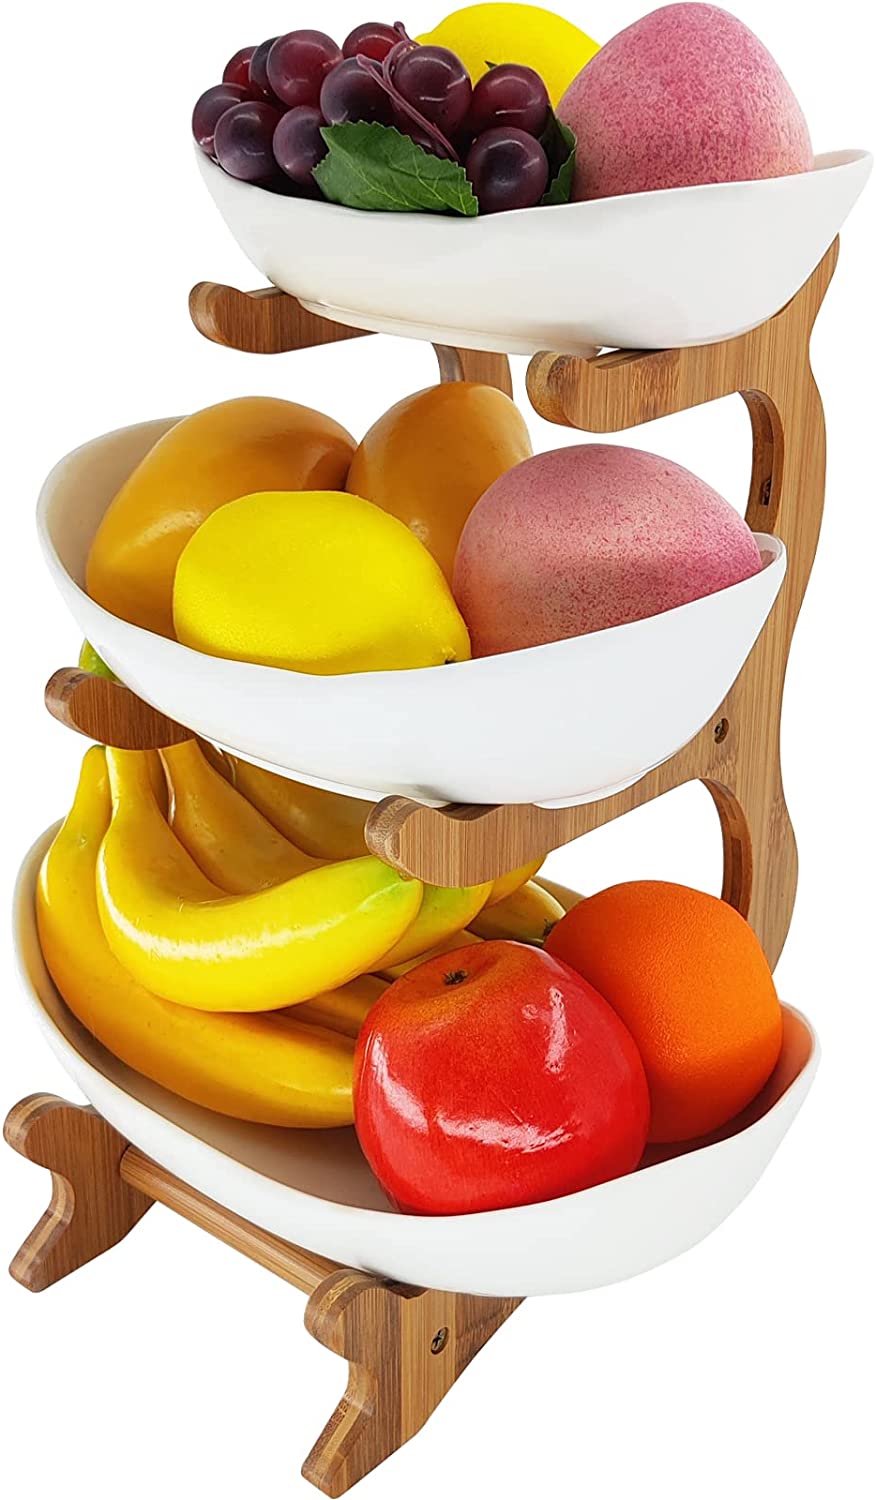 3 Tier Fruit Basket for Kitchen, Ceramic Fruit Bowl for Kitchen Counter, Large Capacity Tiered Fruit Basket Stand, Bamboo Fruit Basket, Porcelain